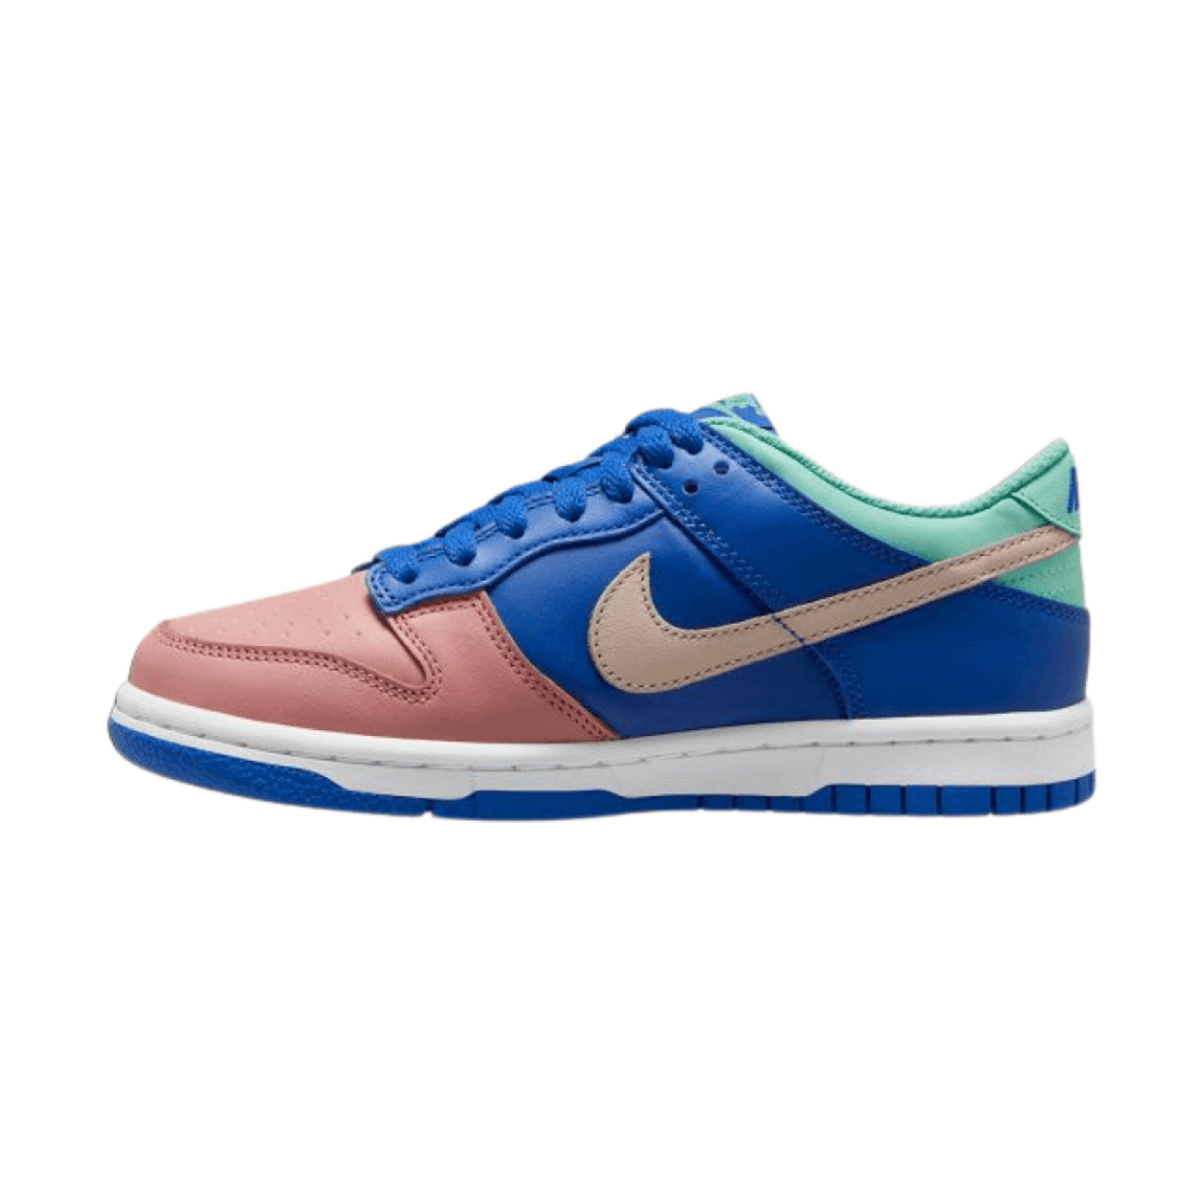 Make A Splash In 2023 With The Nike Dunk Low Salmon Toe